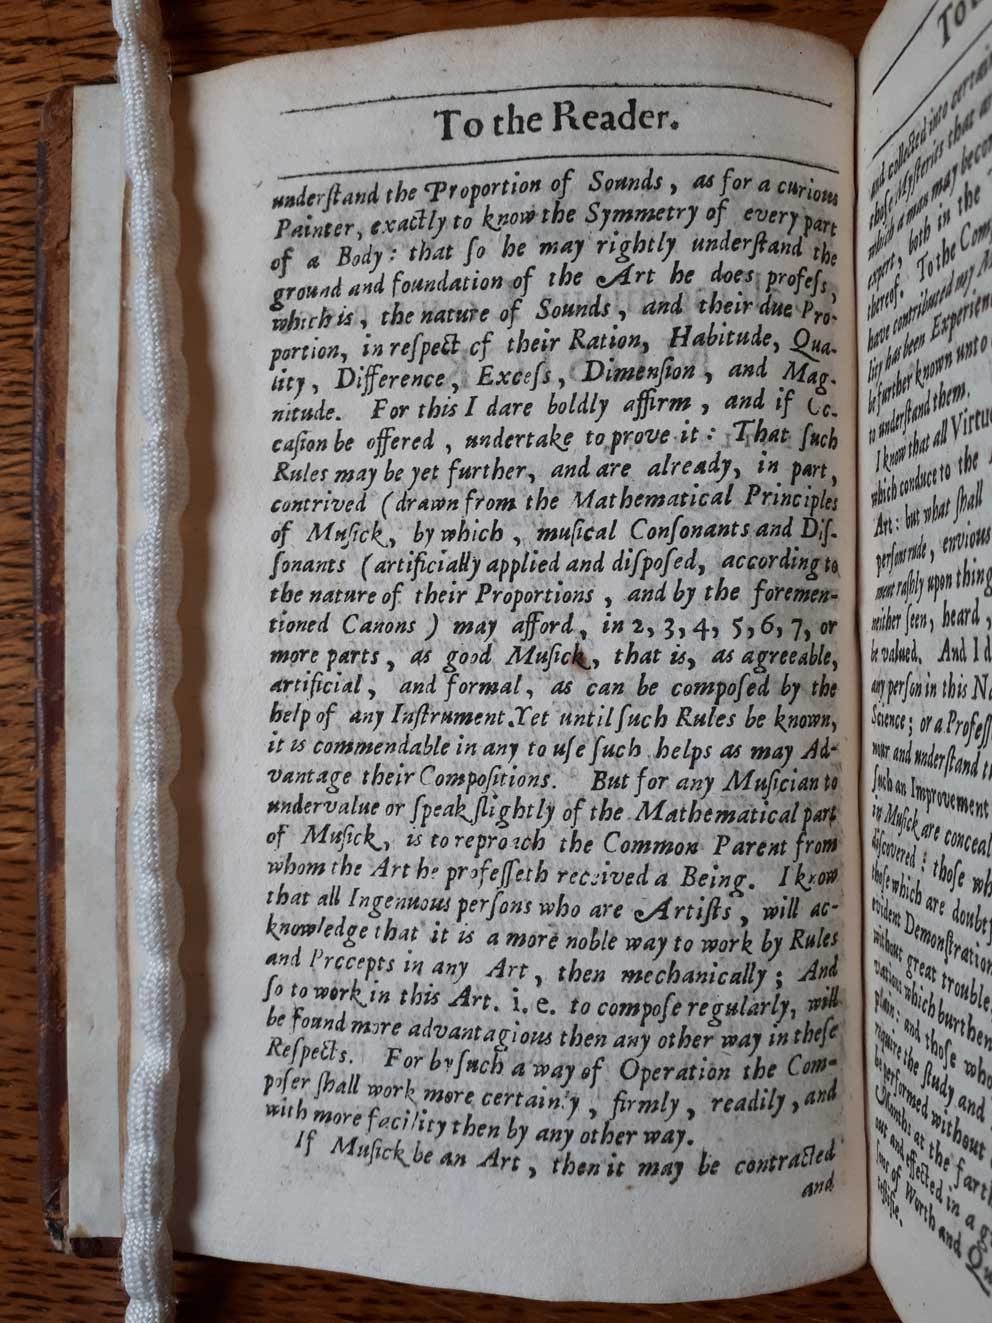 An unnumbered page in an early printed book.